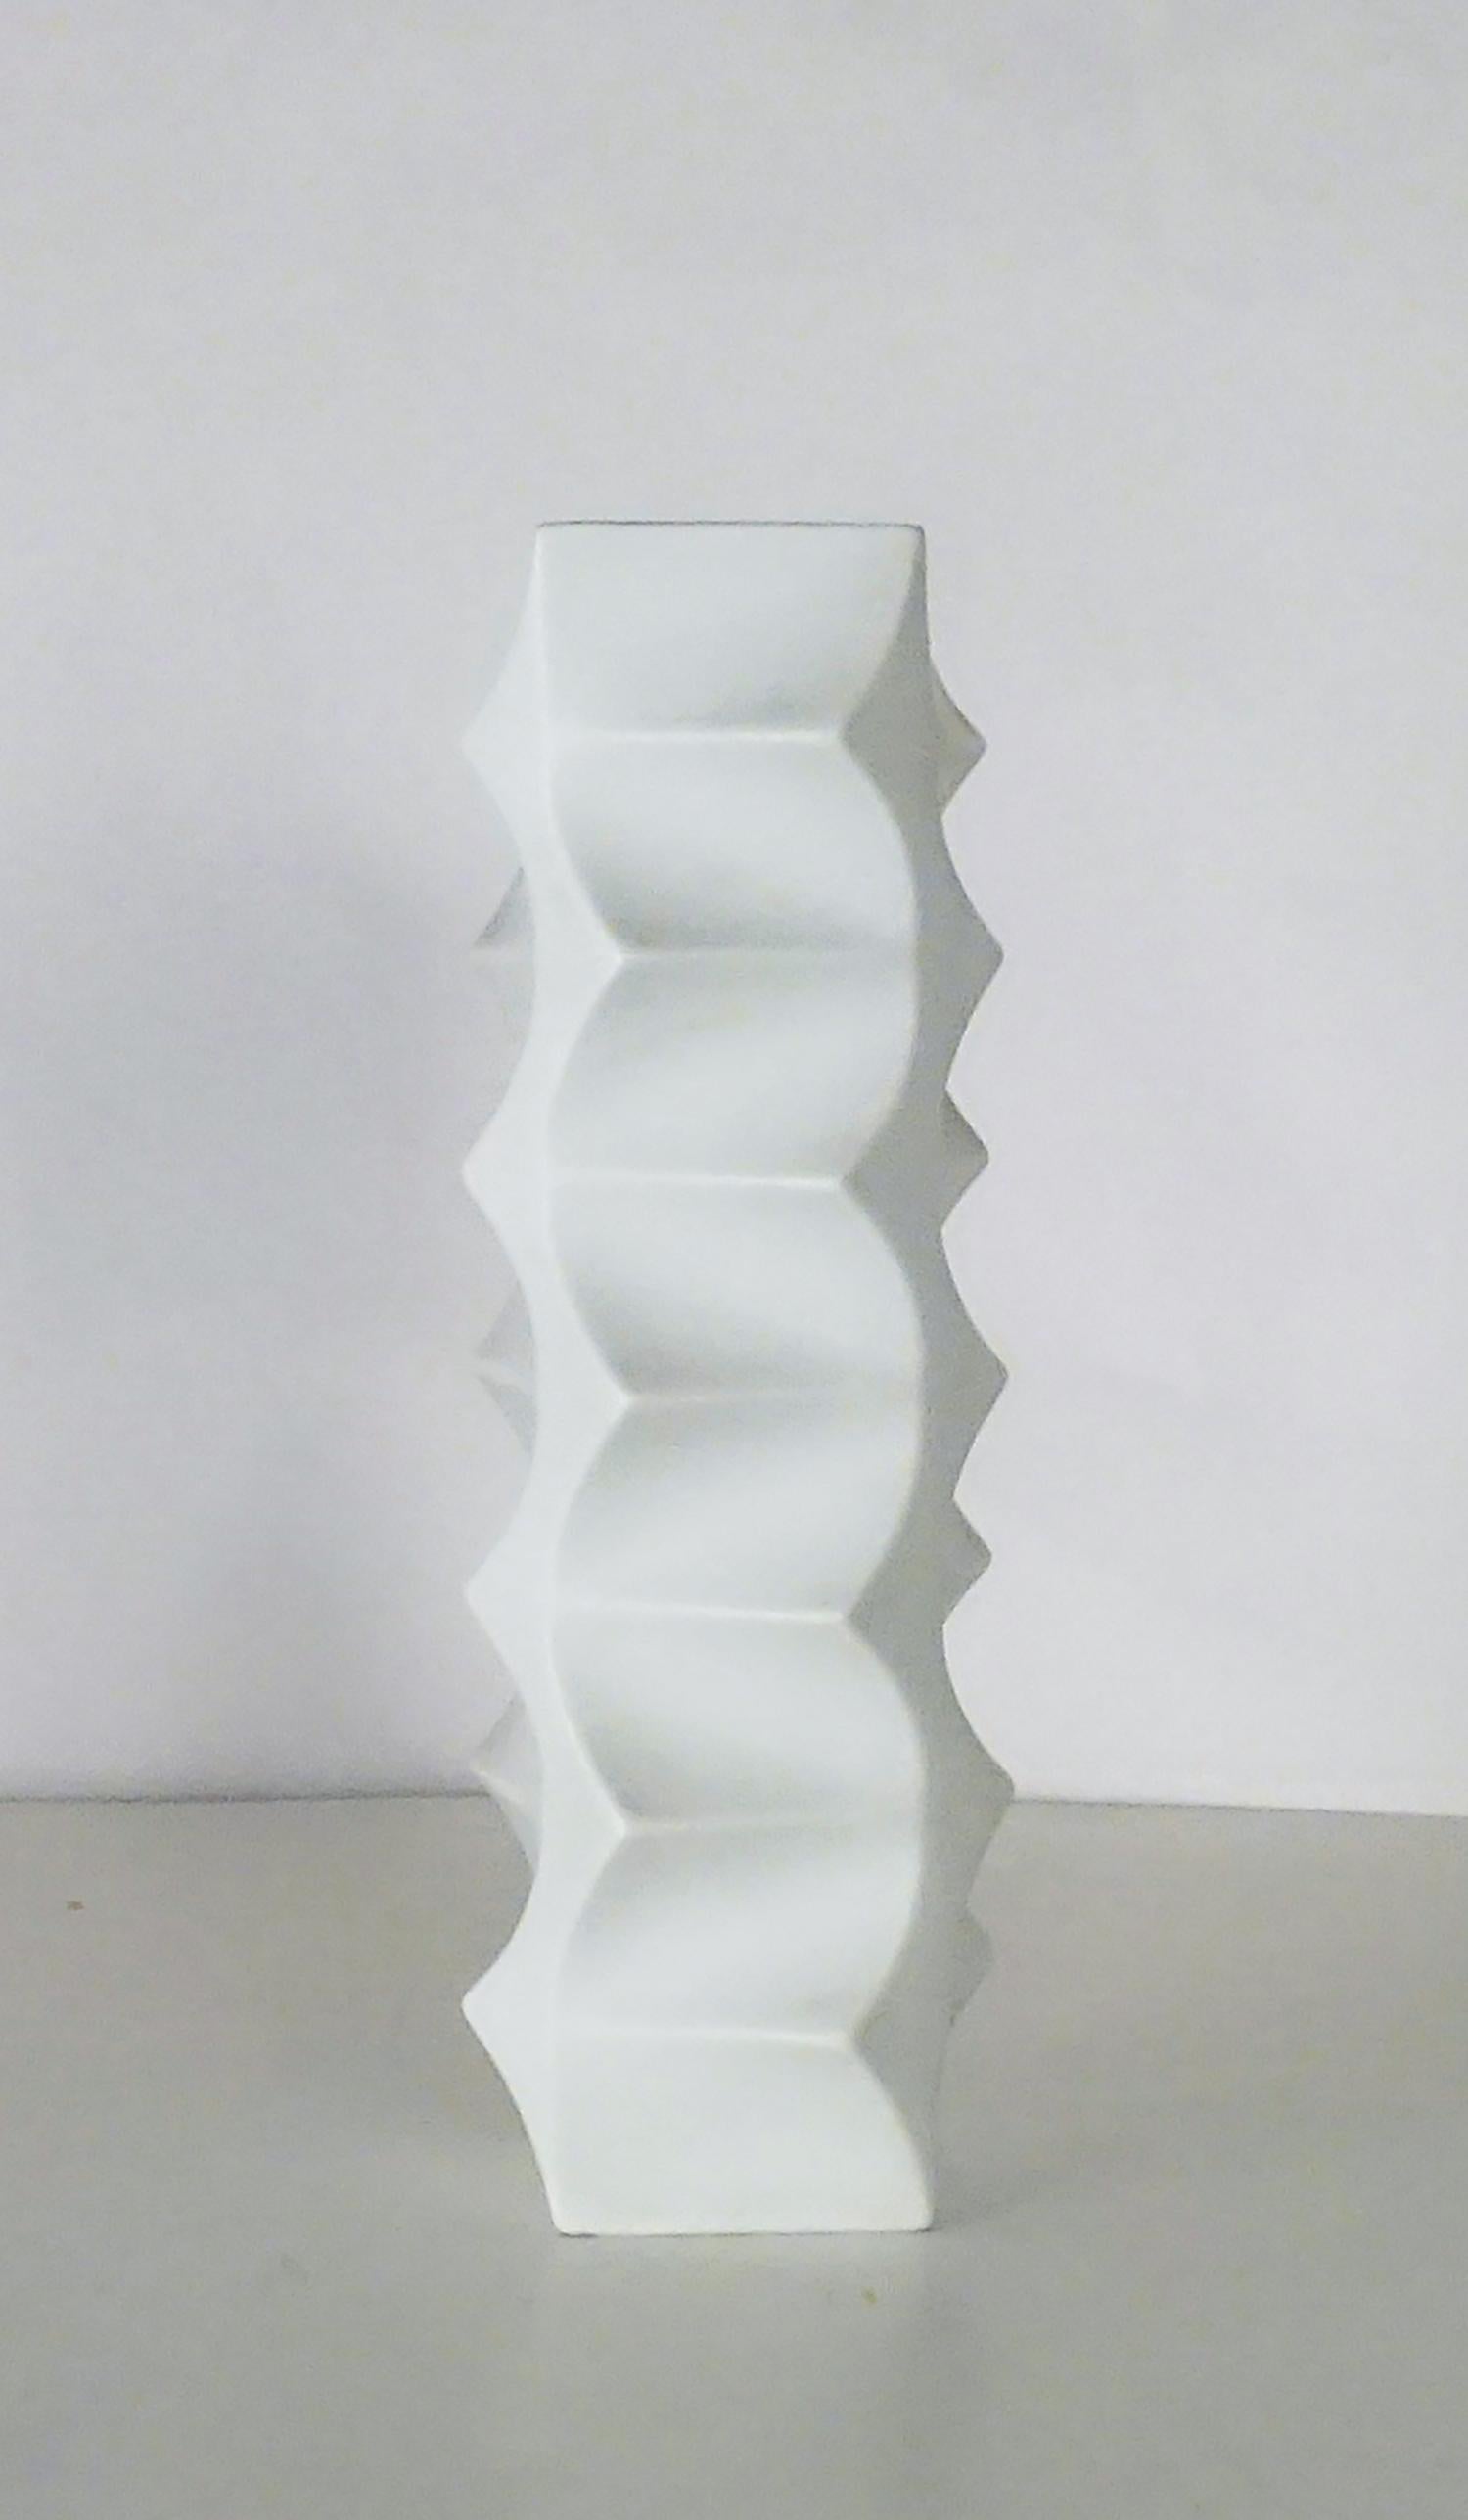 Sculptural porcelain vase by Heinrich Fuchs for Hutschenreuther, released between 1968 and 1970. Matte exterior, gloss interior. Marked